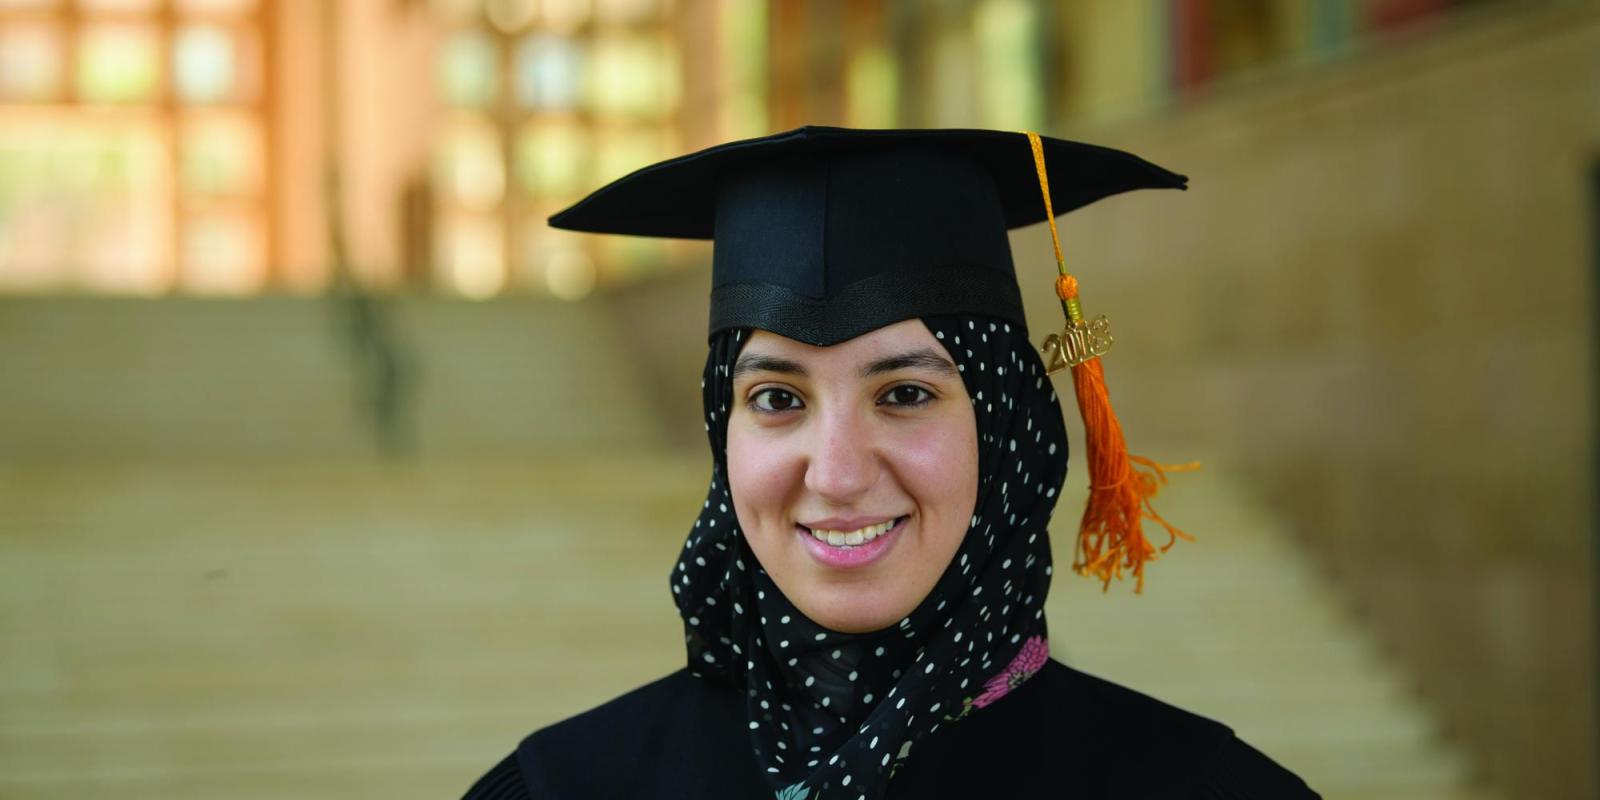 Menna Hasan (MSc '18): My master’s at AUC was even better than I expected